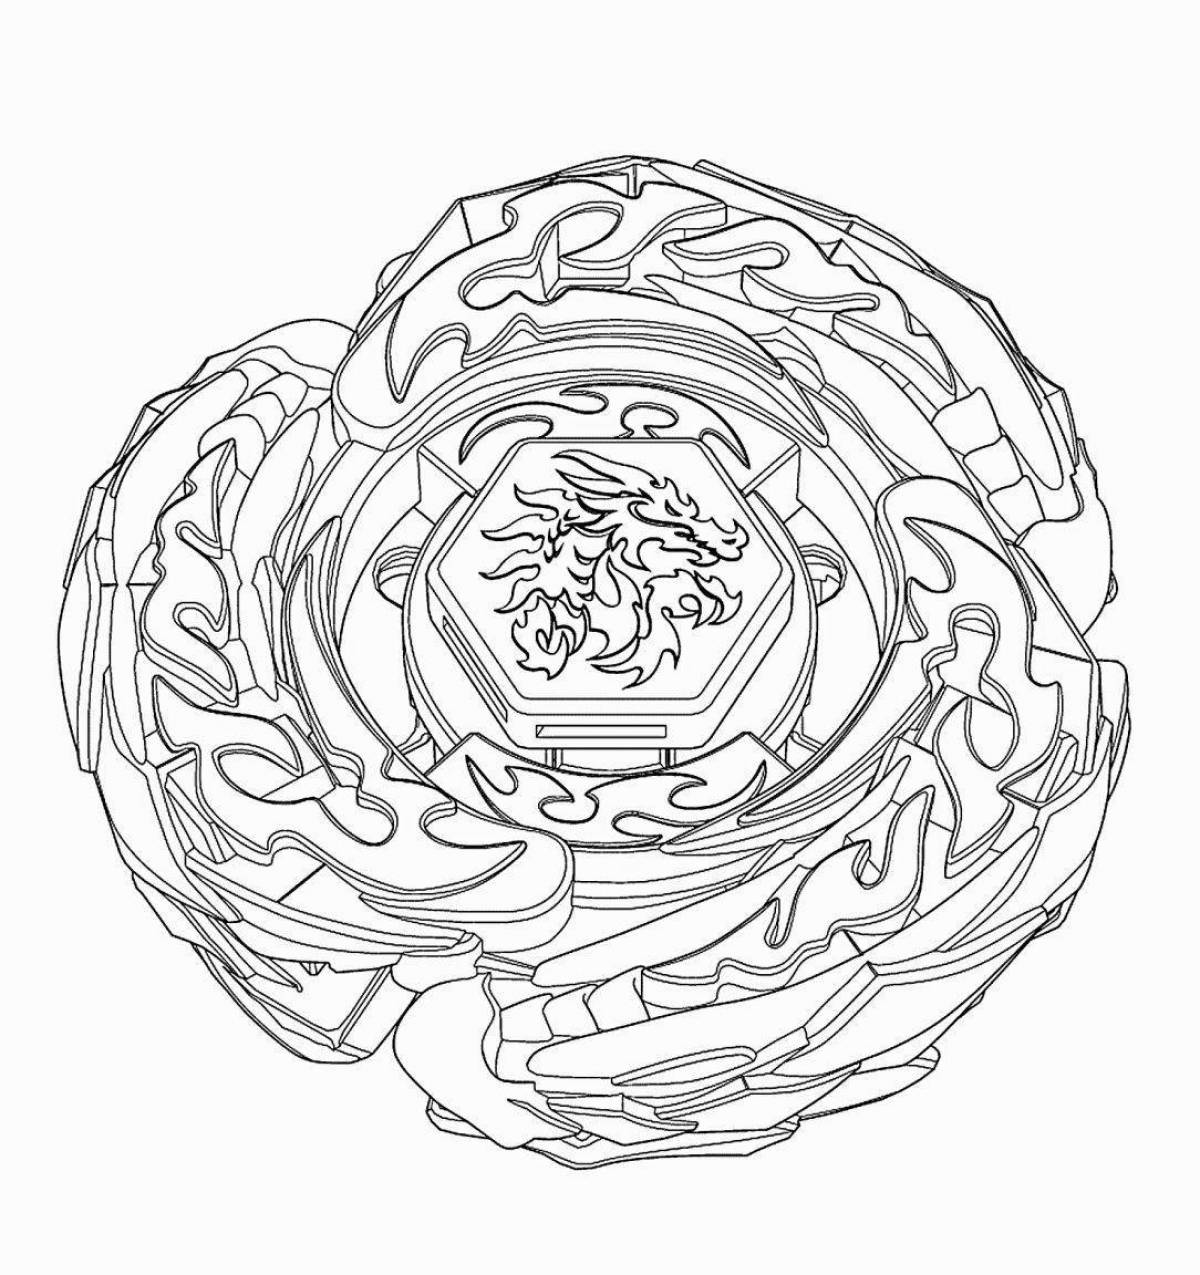 Beyblade burst coloring page animated